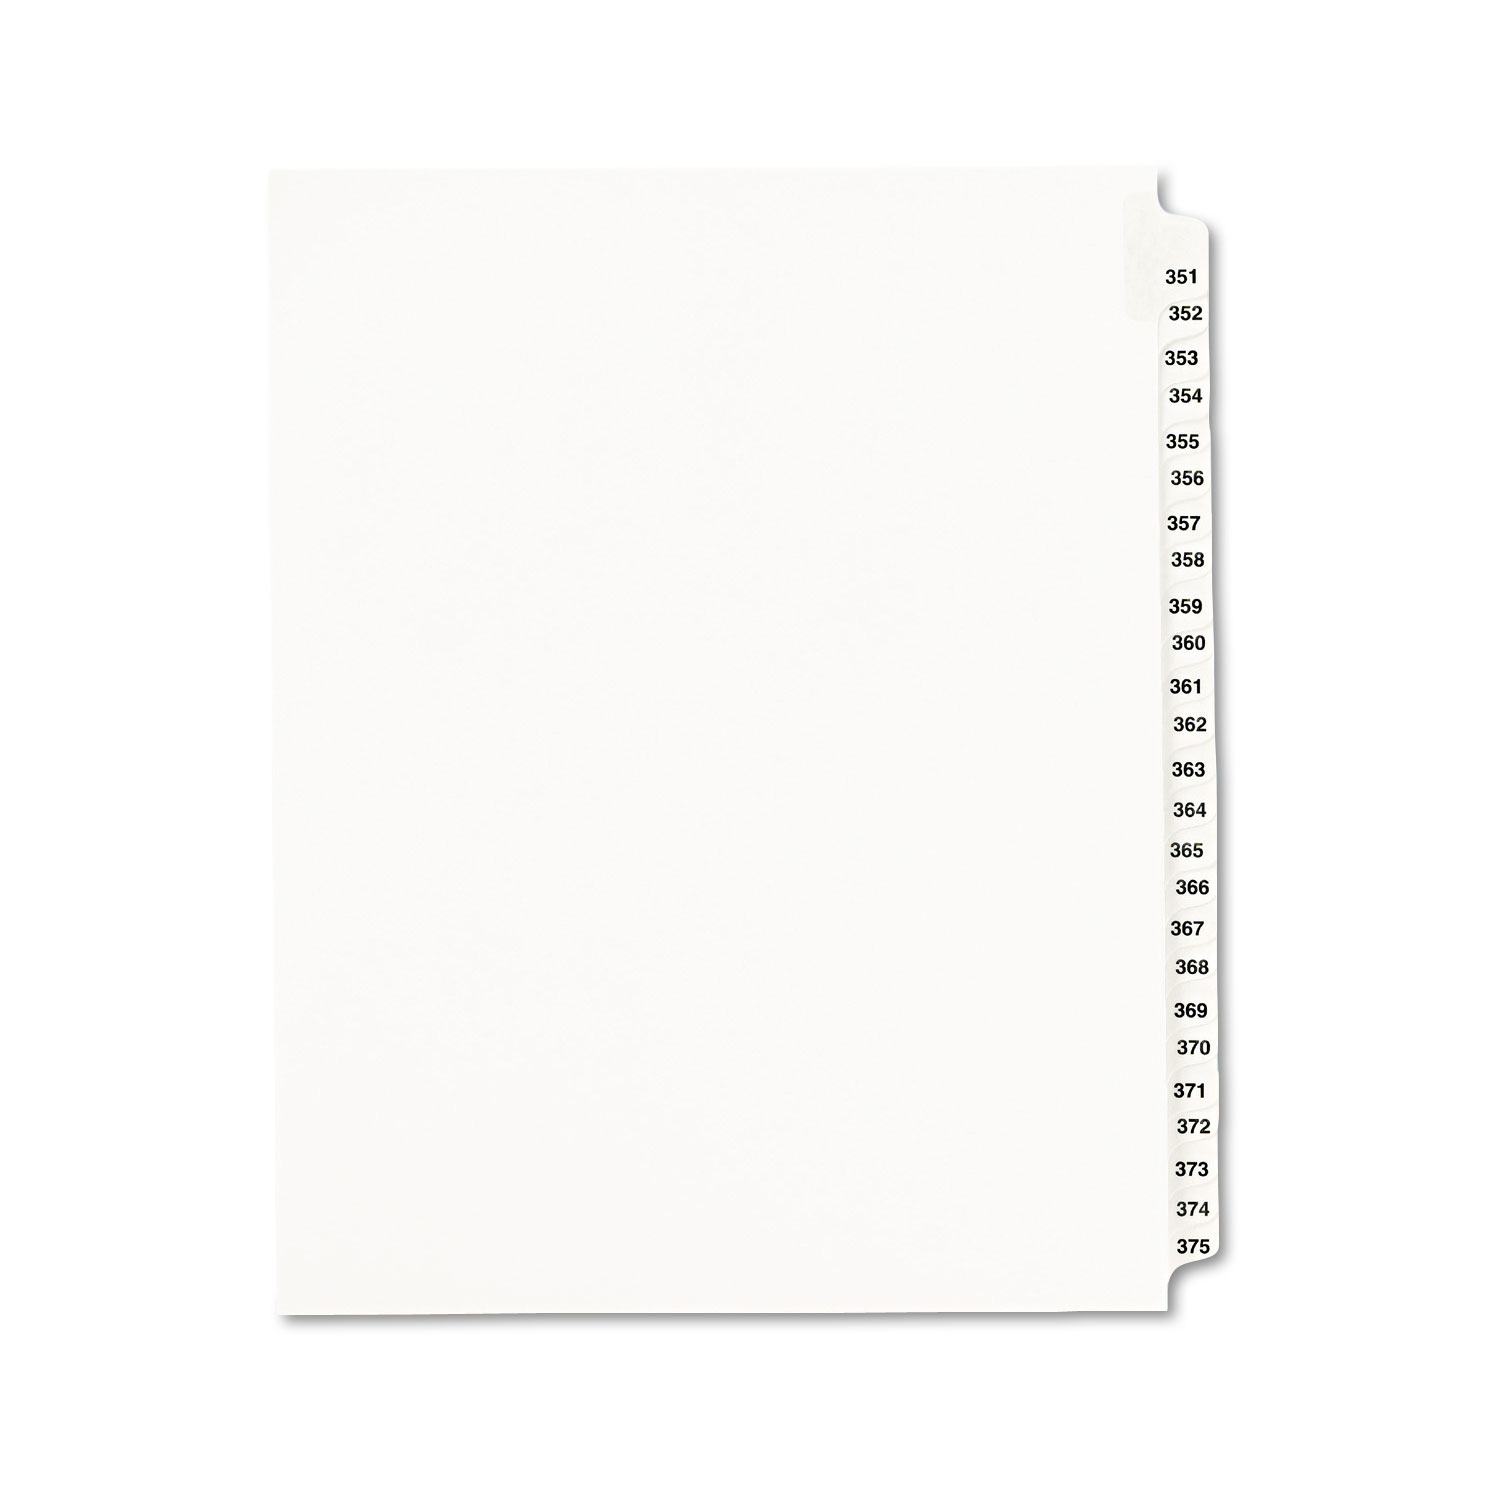  Avery 01344 Preprinted Legal Exhibit Side Tab Index Dividers, Avery Style, 25-Tab, 351 to 375, 11 x 8.5, White, 1 Set (AVE01344) 